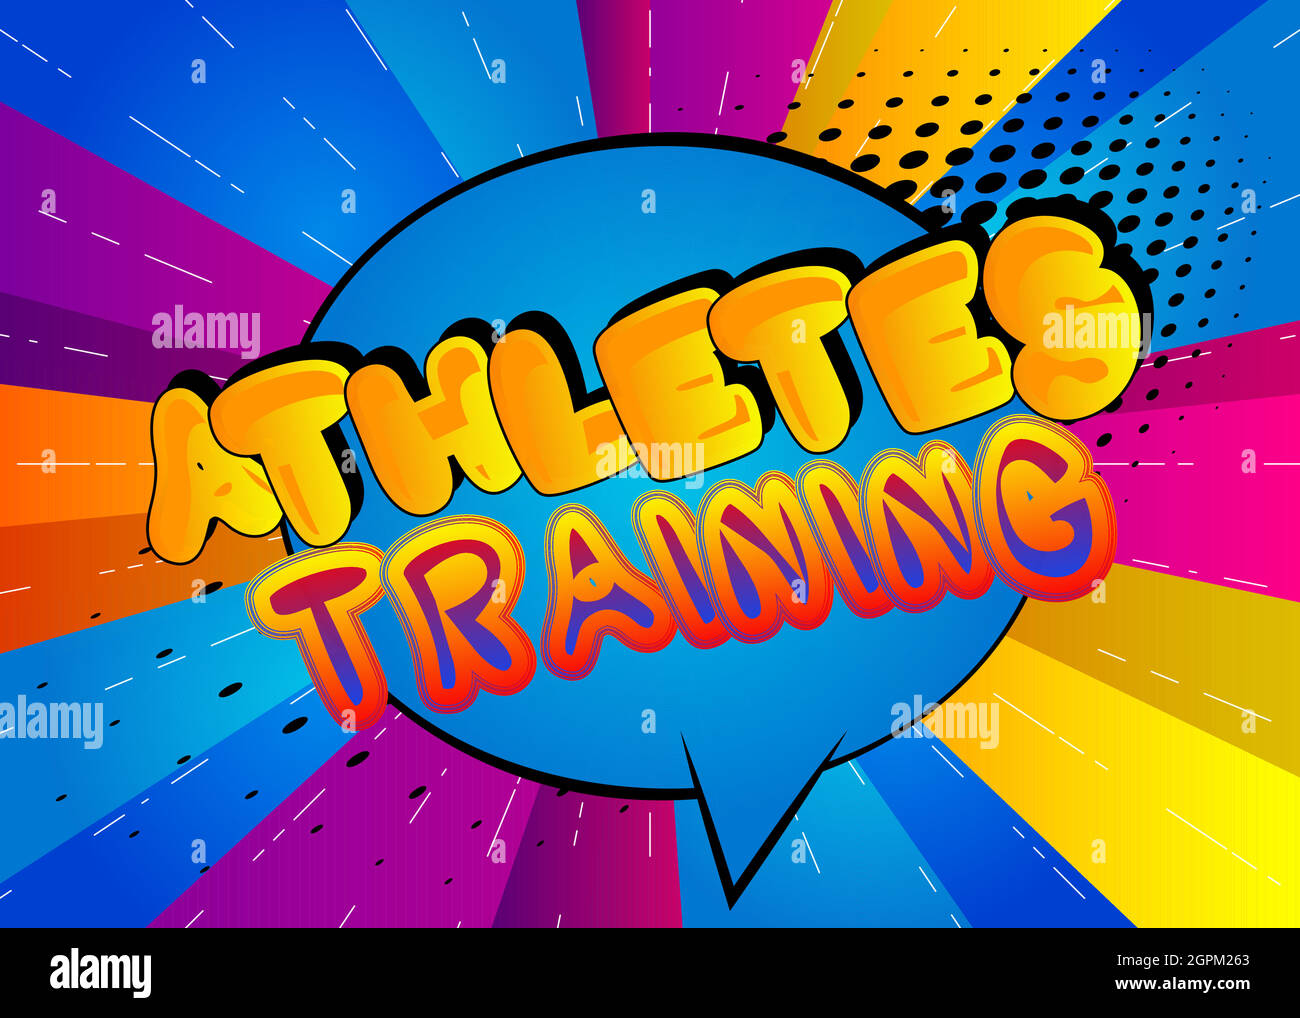 Athletes Training - Comic book style text Stock Vector